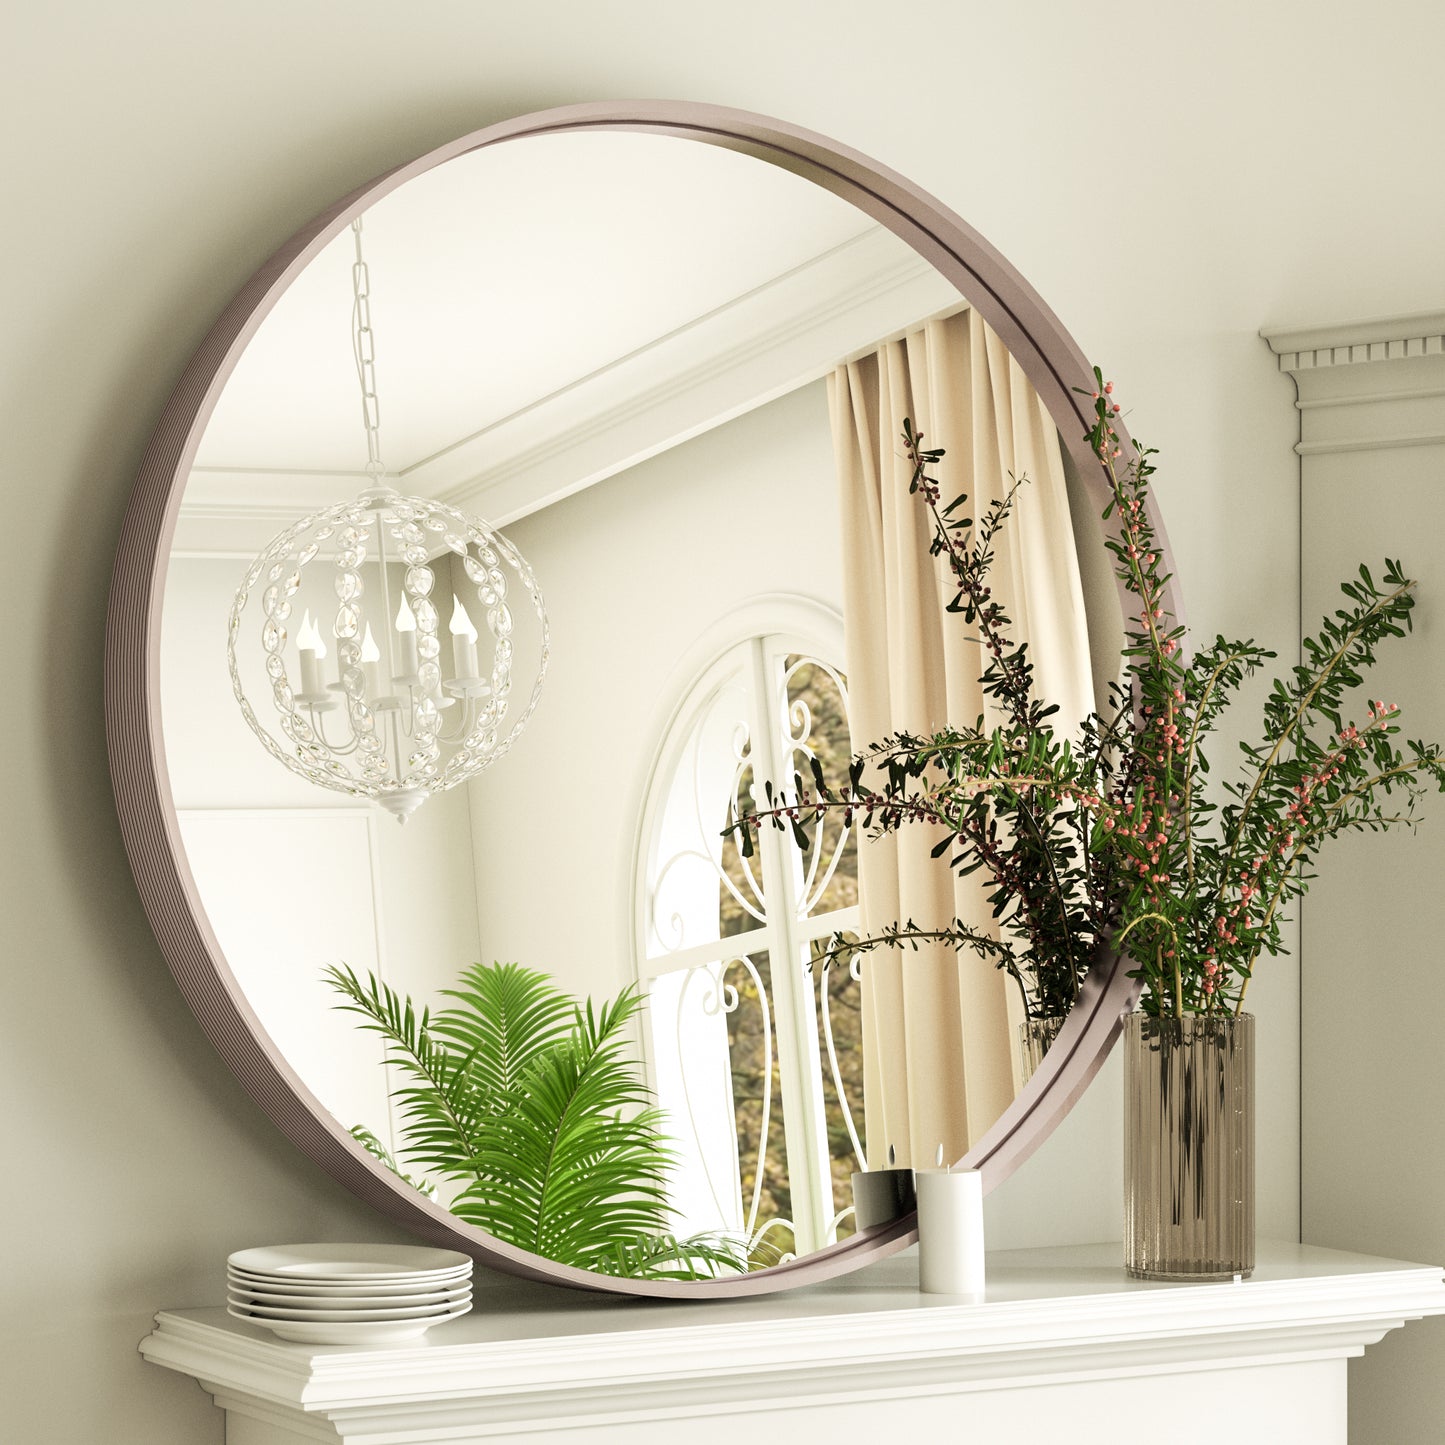 
                  
                    36 Inch | Large Minimalist Circular Deisgn Mirror with Ribbed Texture Aluminum Alloy Metal Frame, for Bedroom/Bathroom Vanity
                  
                